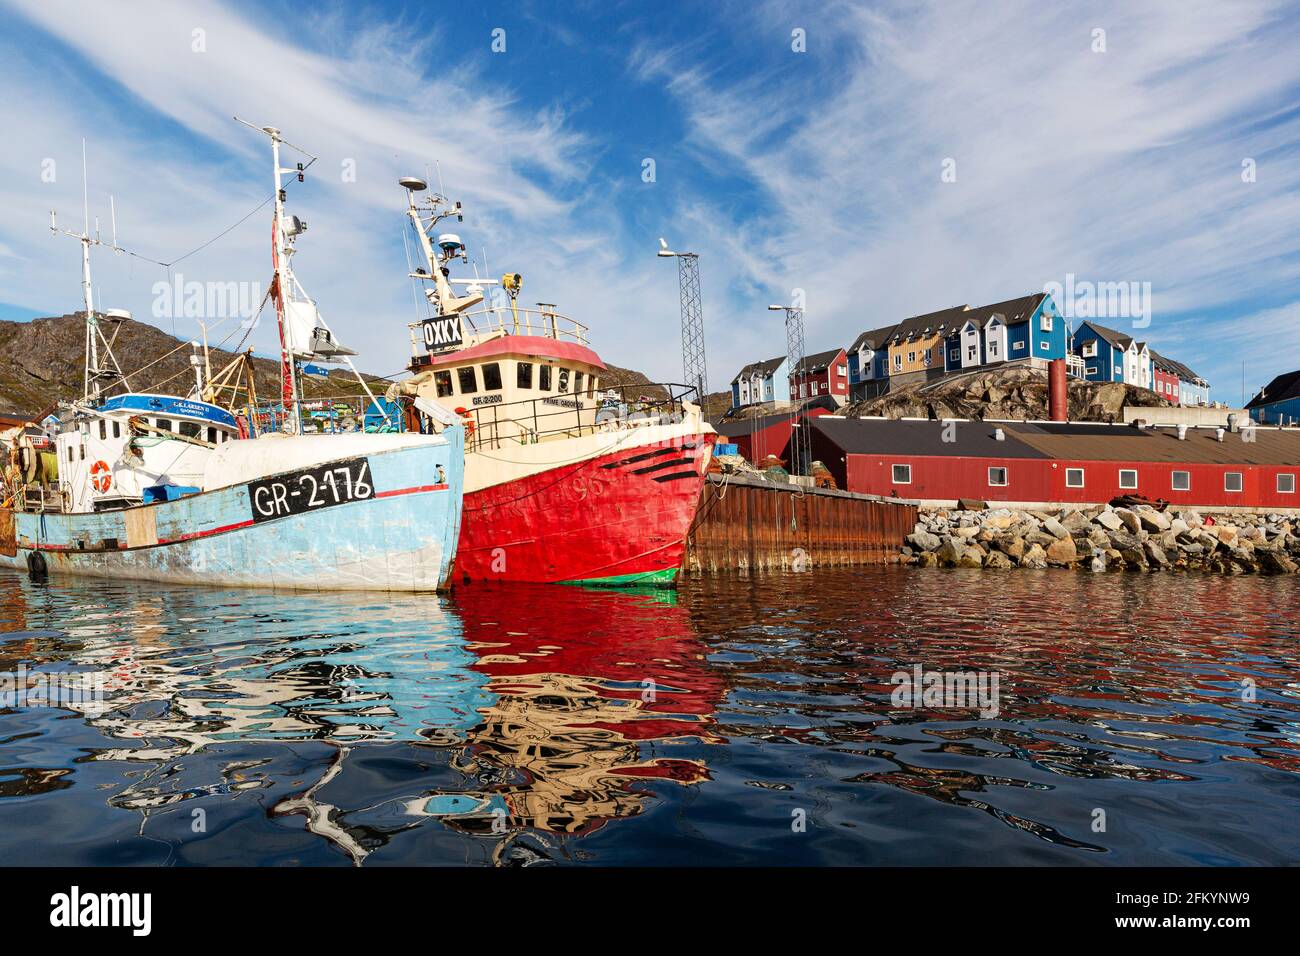 Whaleboat in the harbor in the small Greenlandic village of Qaqortoq, formerly Julianehåb, in southern Greenland. Stock Photo